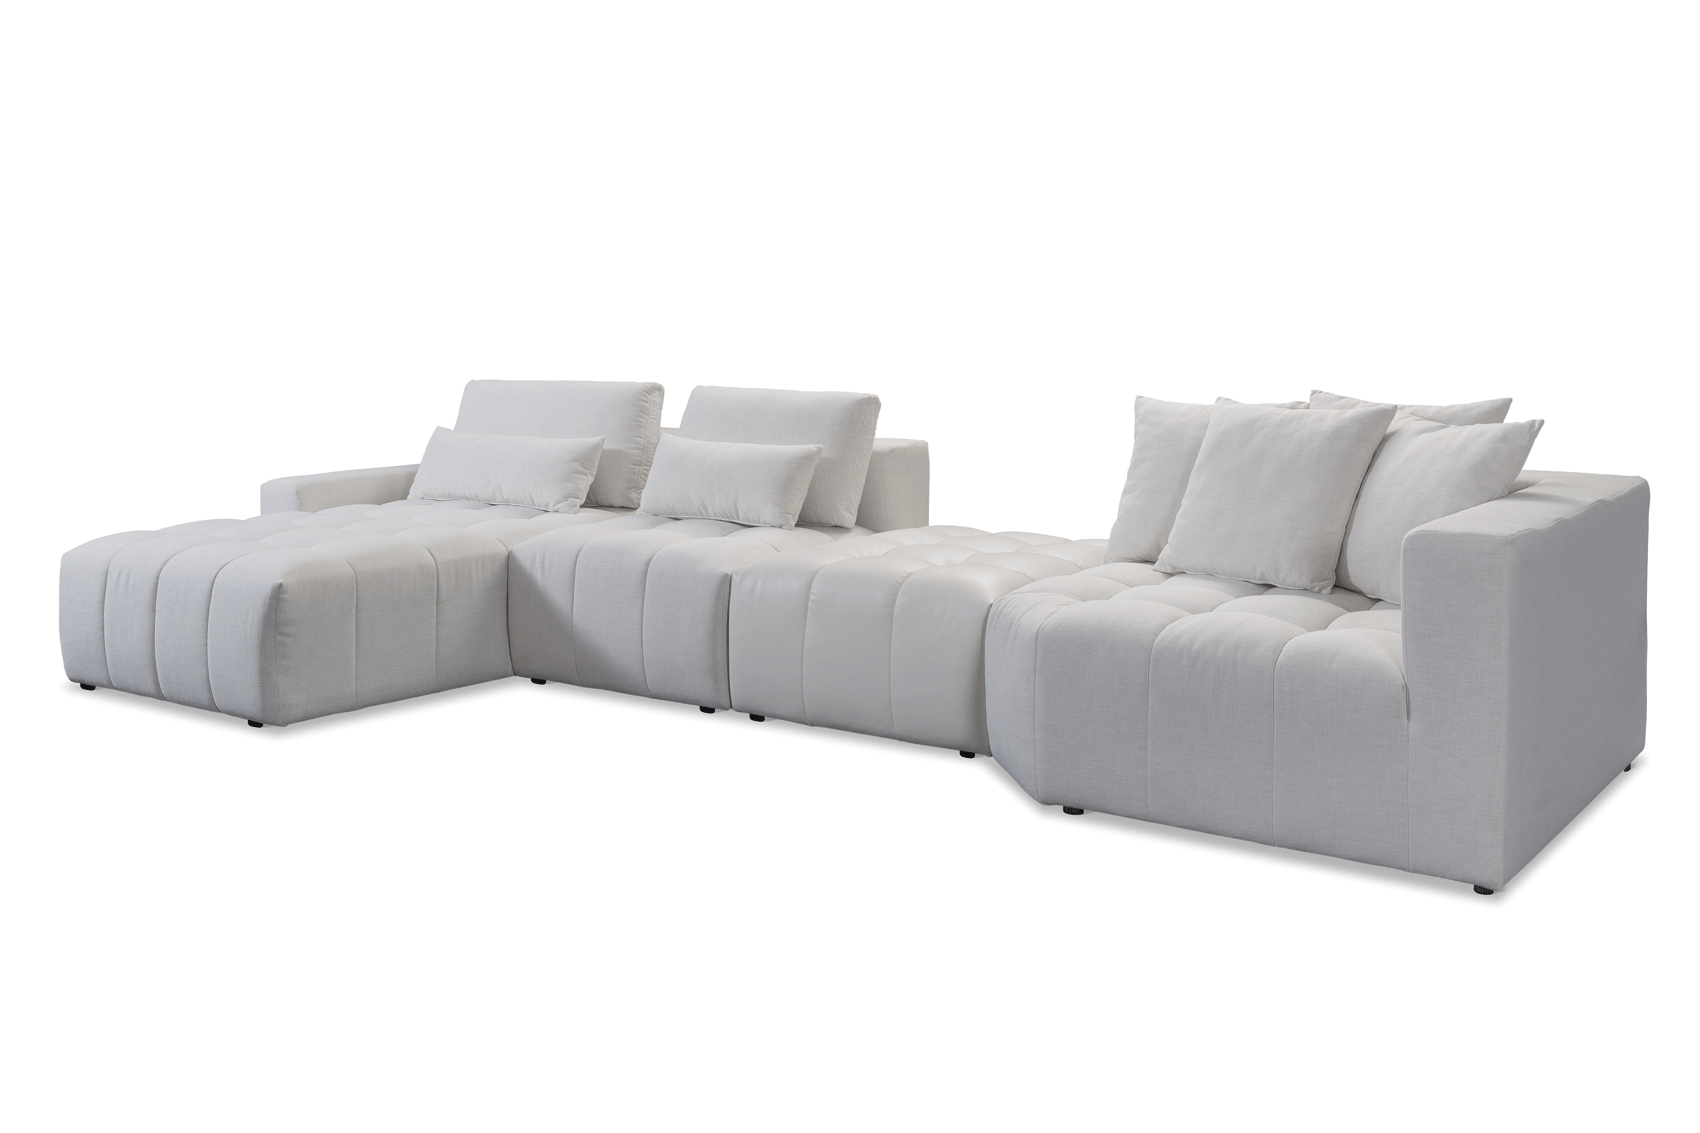 Brands Galla Leather Collection, Europe Sense Sectional